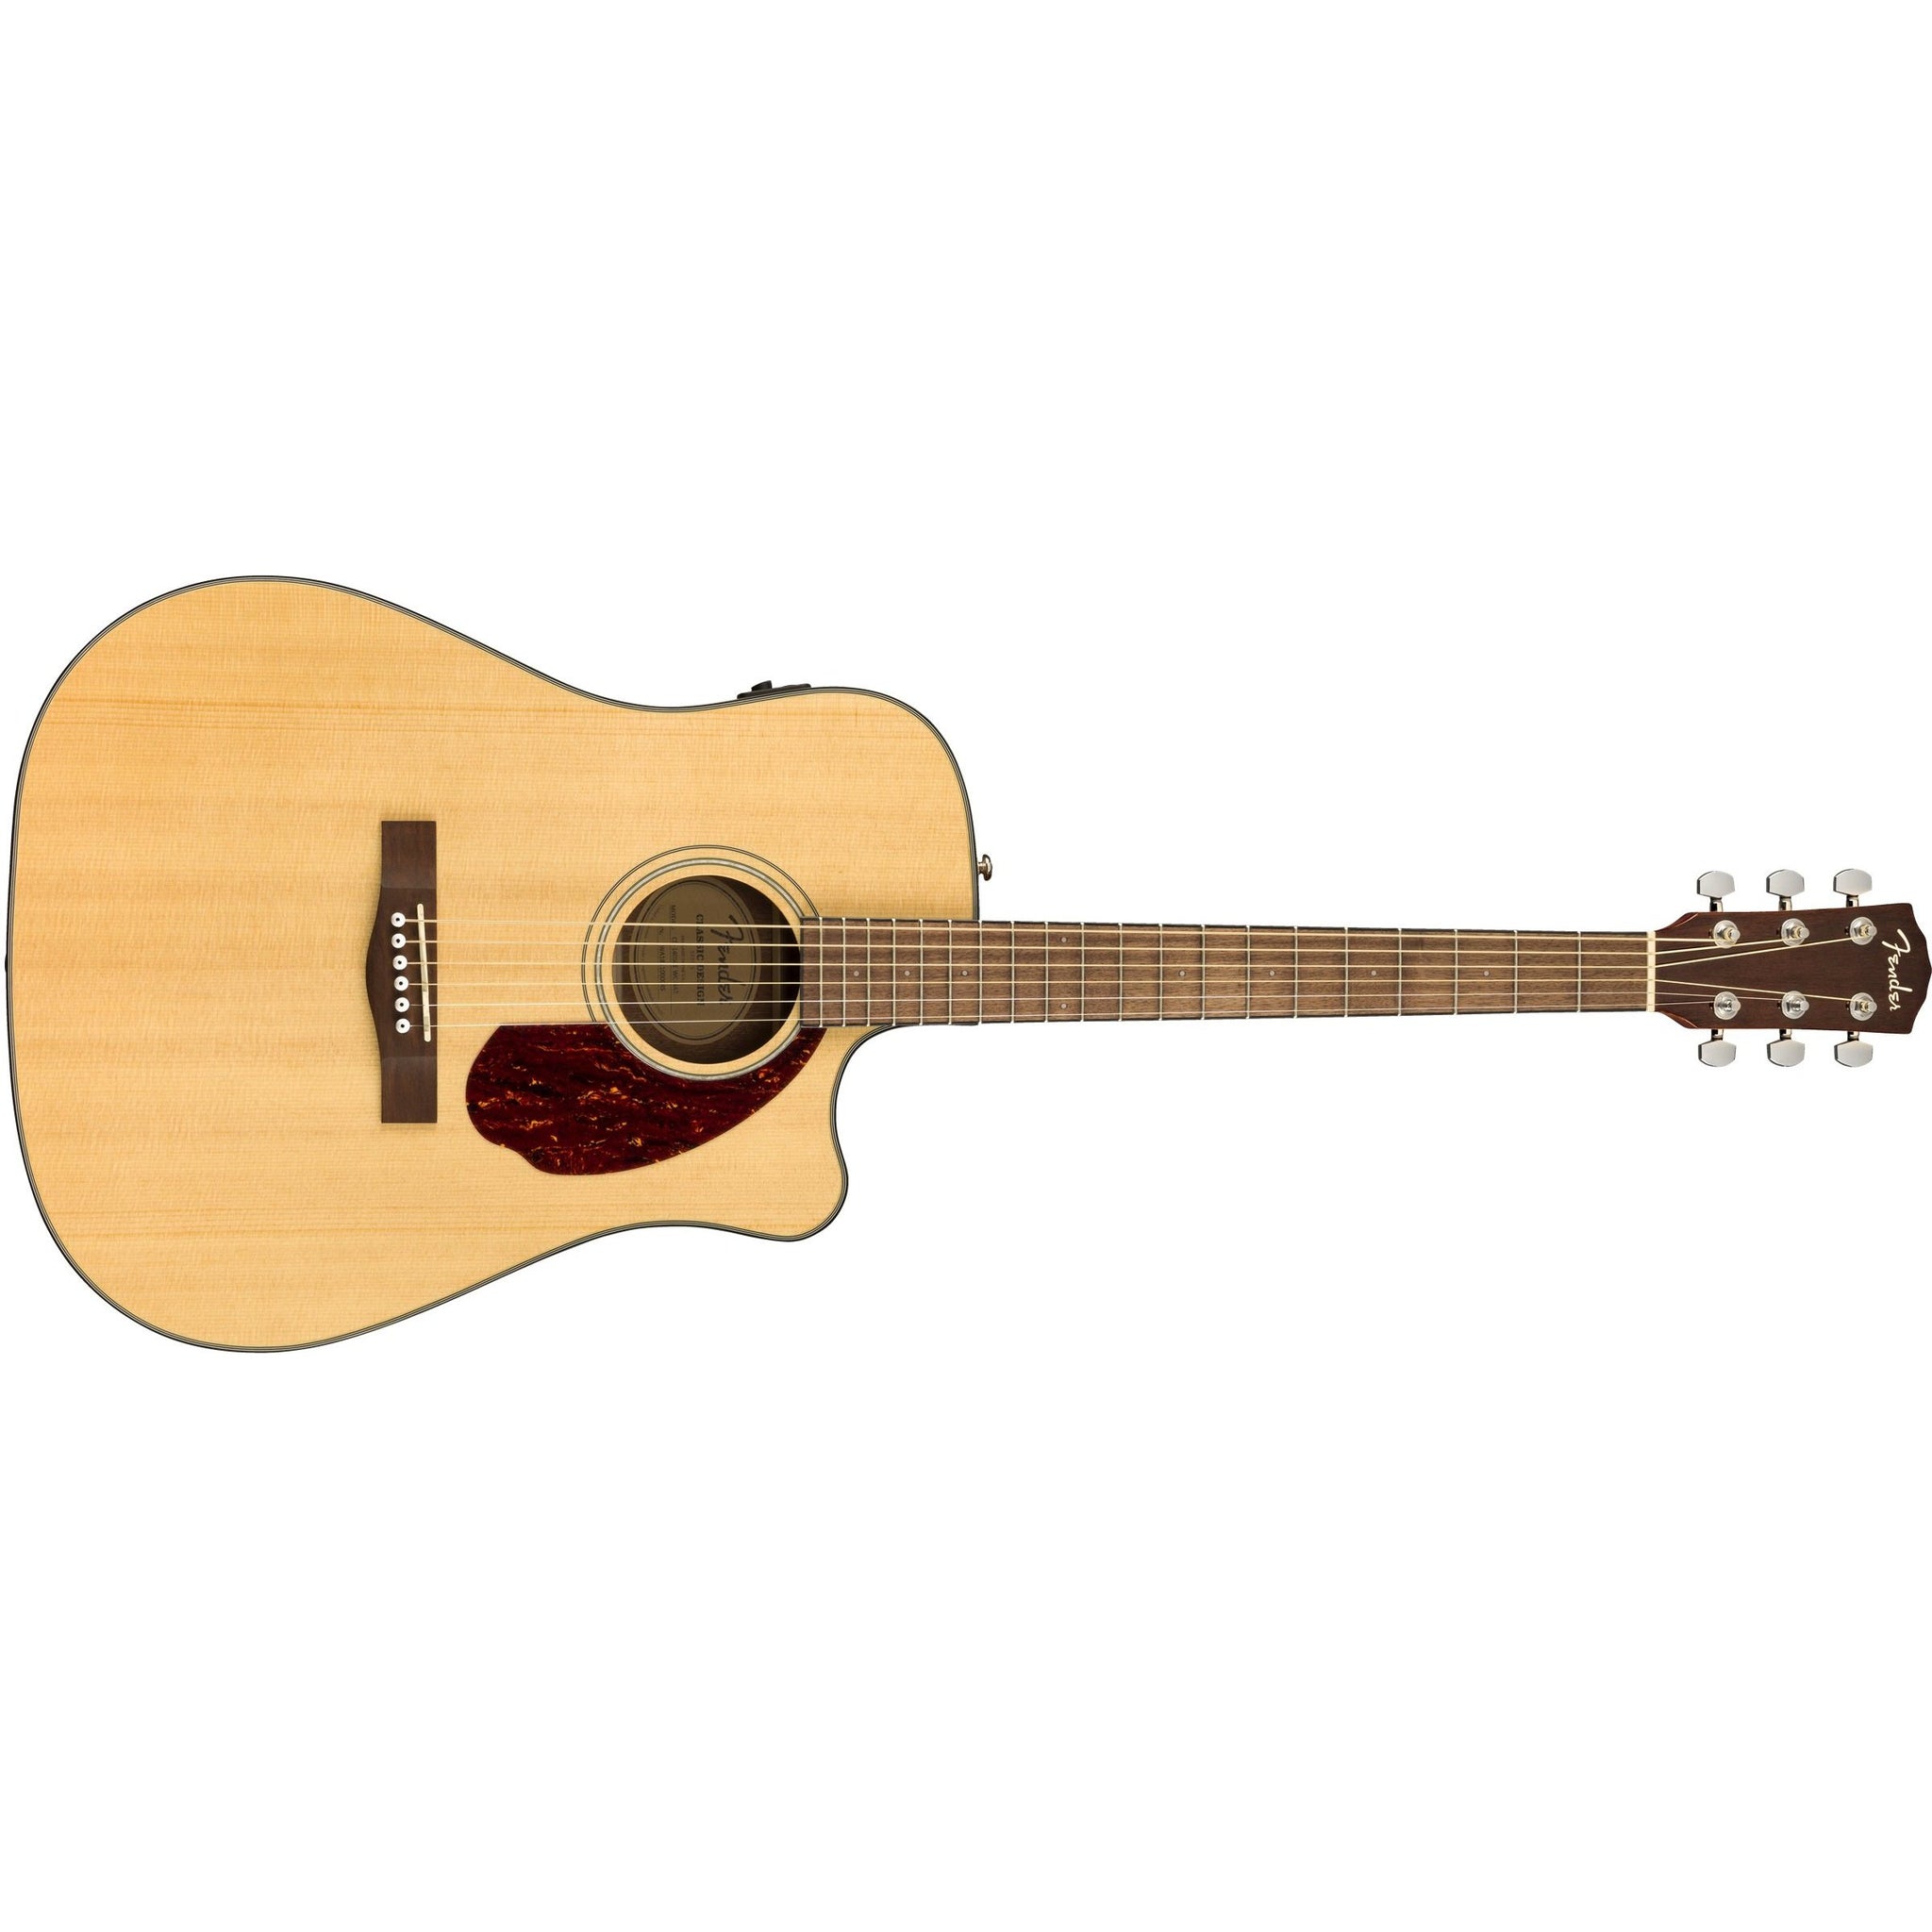 Fender CD-140SCE Dreadnought Acoustic/Electric Guitar with Hardshell Case-Natural-Music World Academy